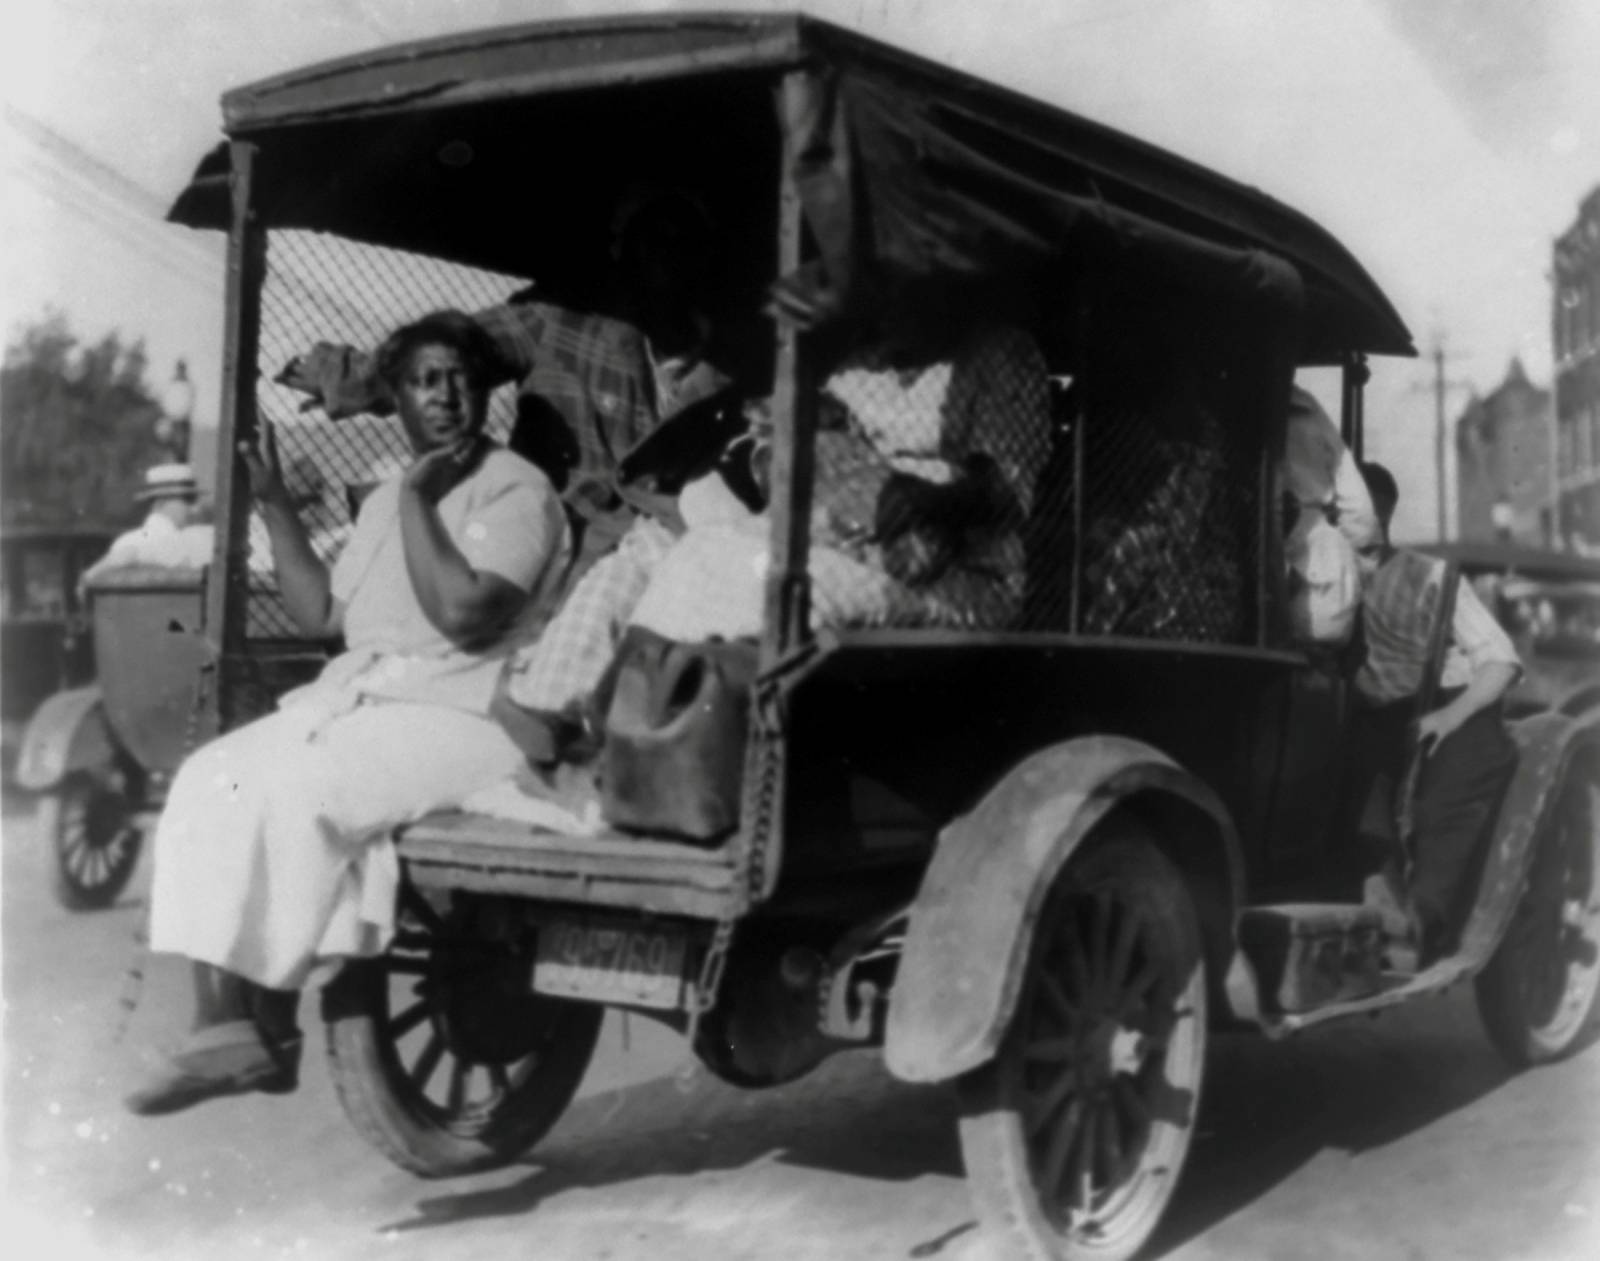 A truck carries African Americans during the 1921 race massacre in Tulsa